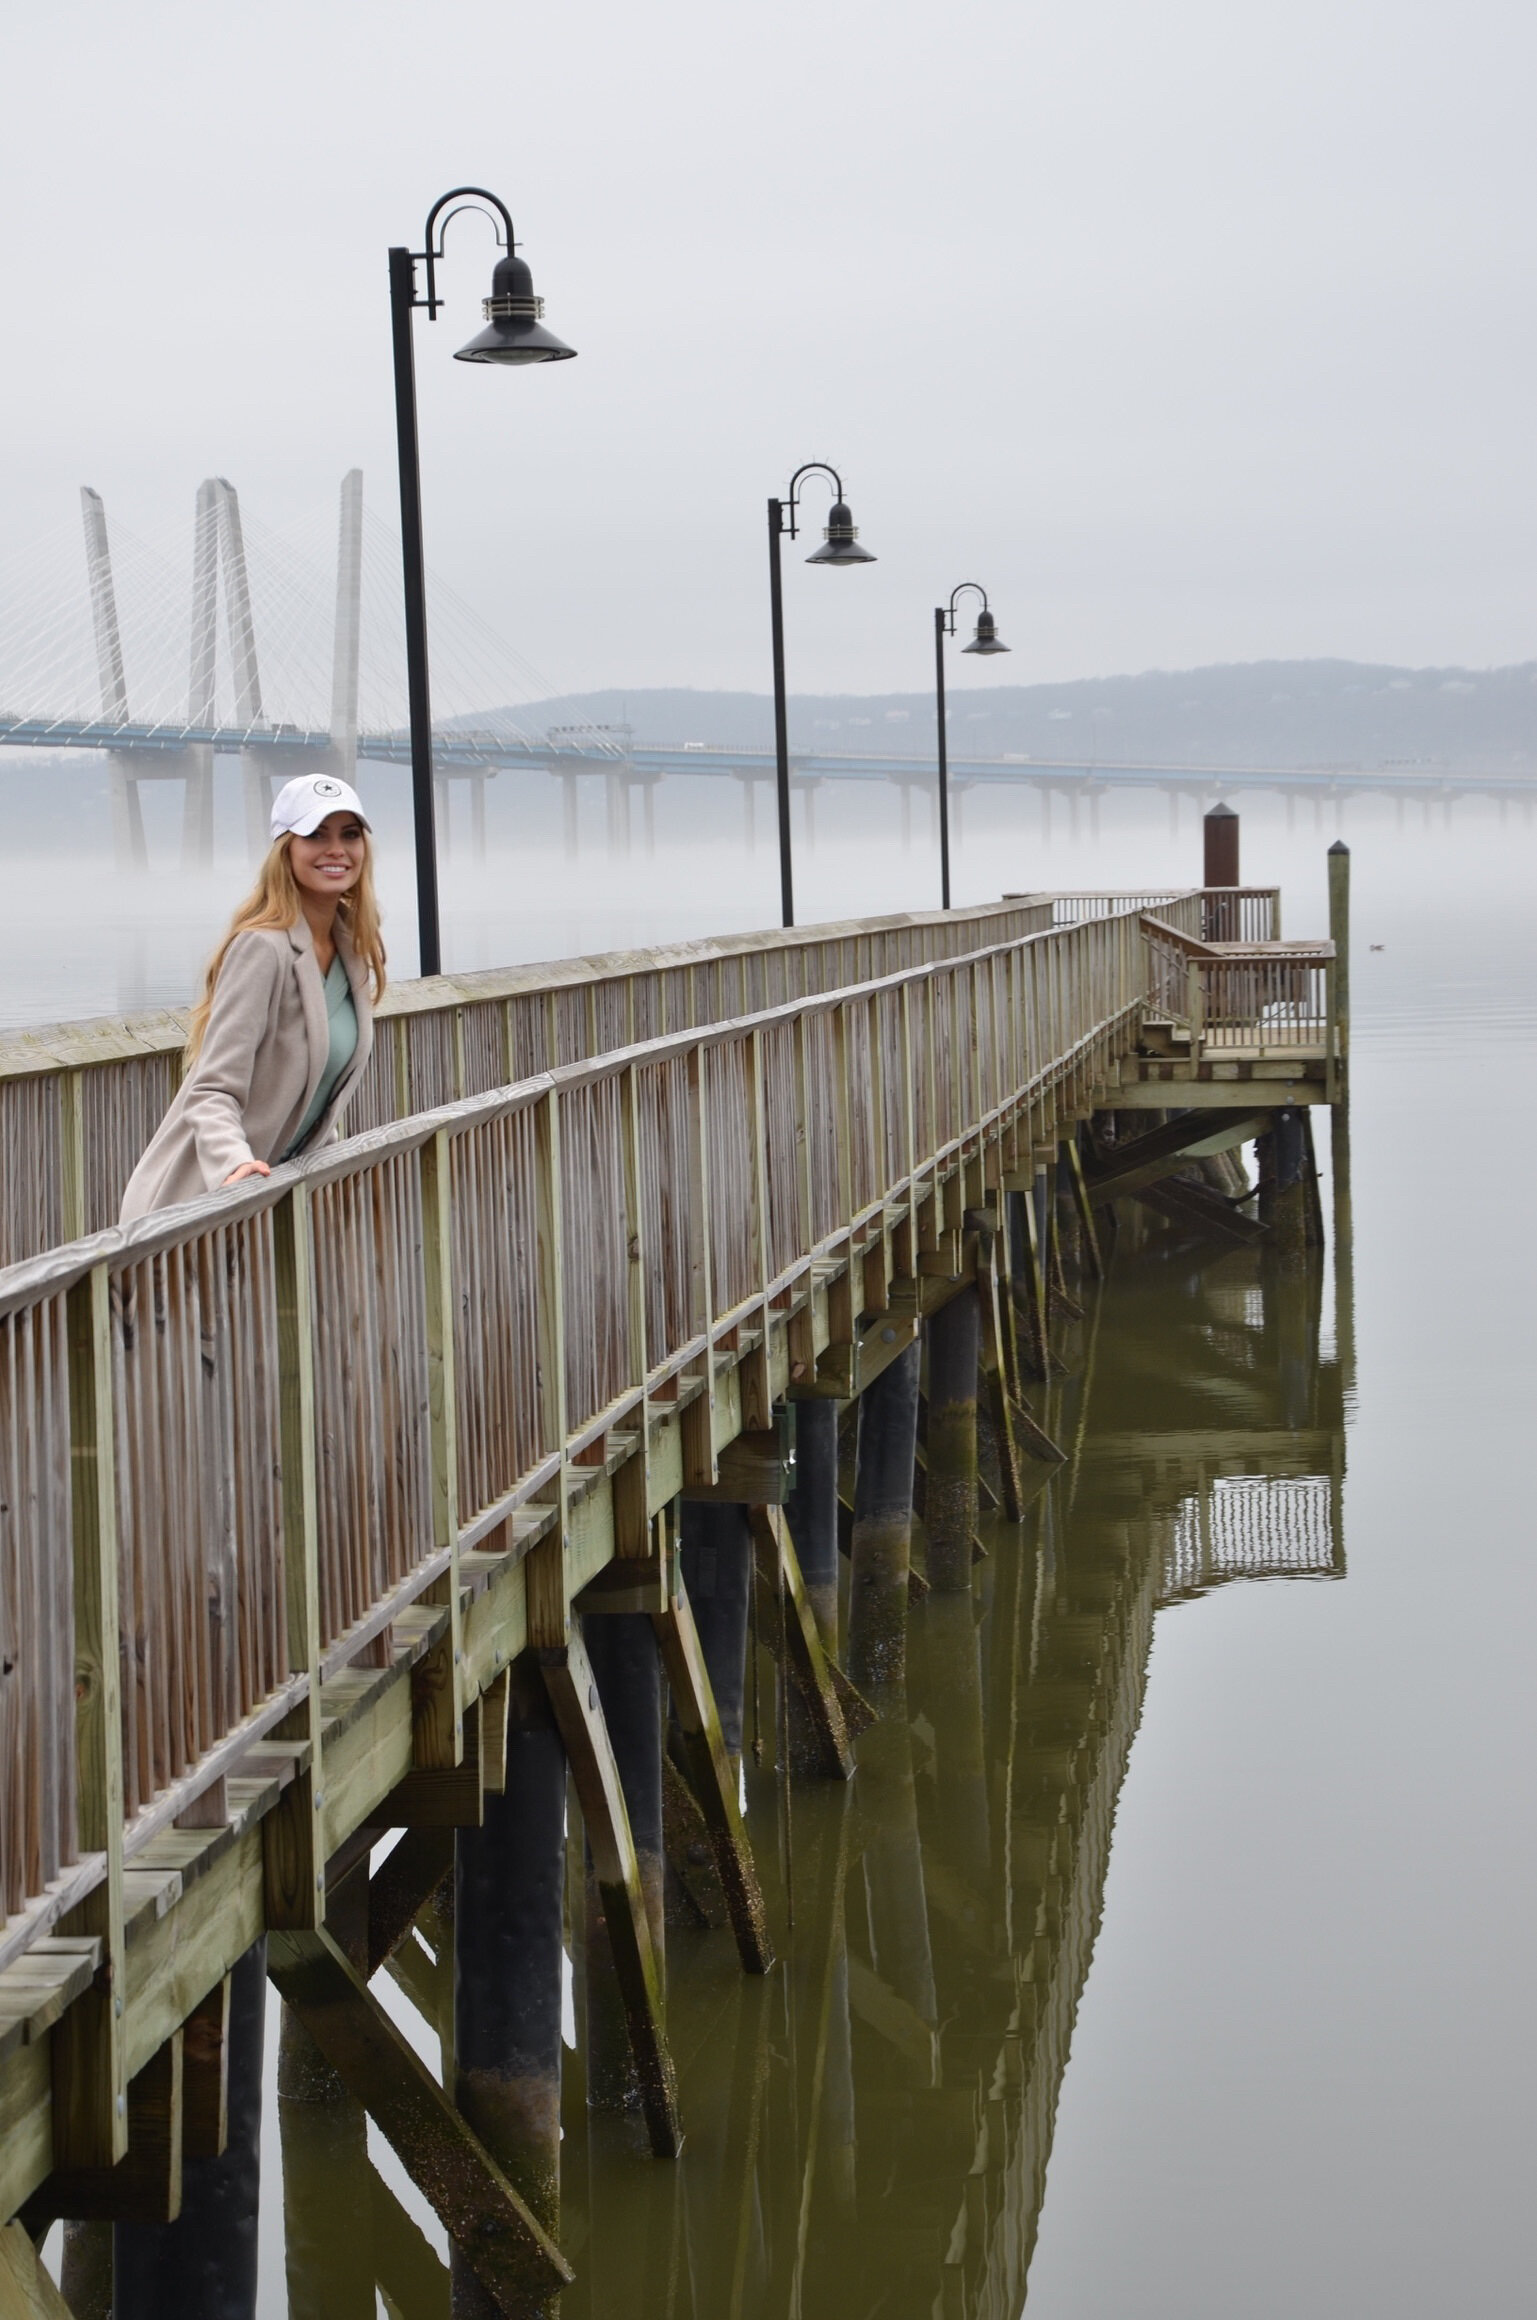 Ashley M Lands takes you on a tour of things to do in Tarrytown, NY this fall. 